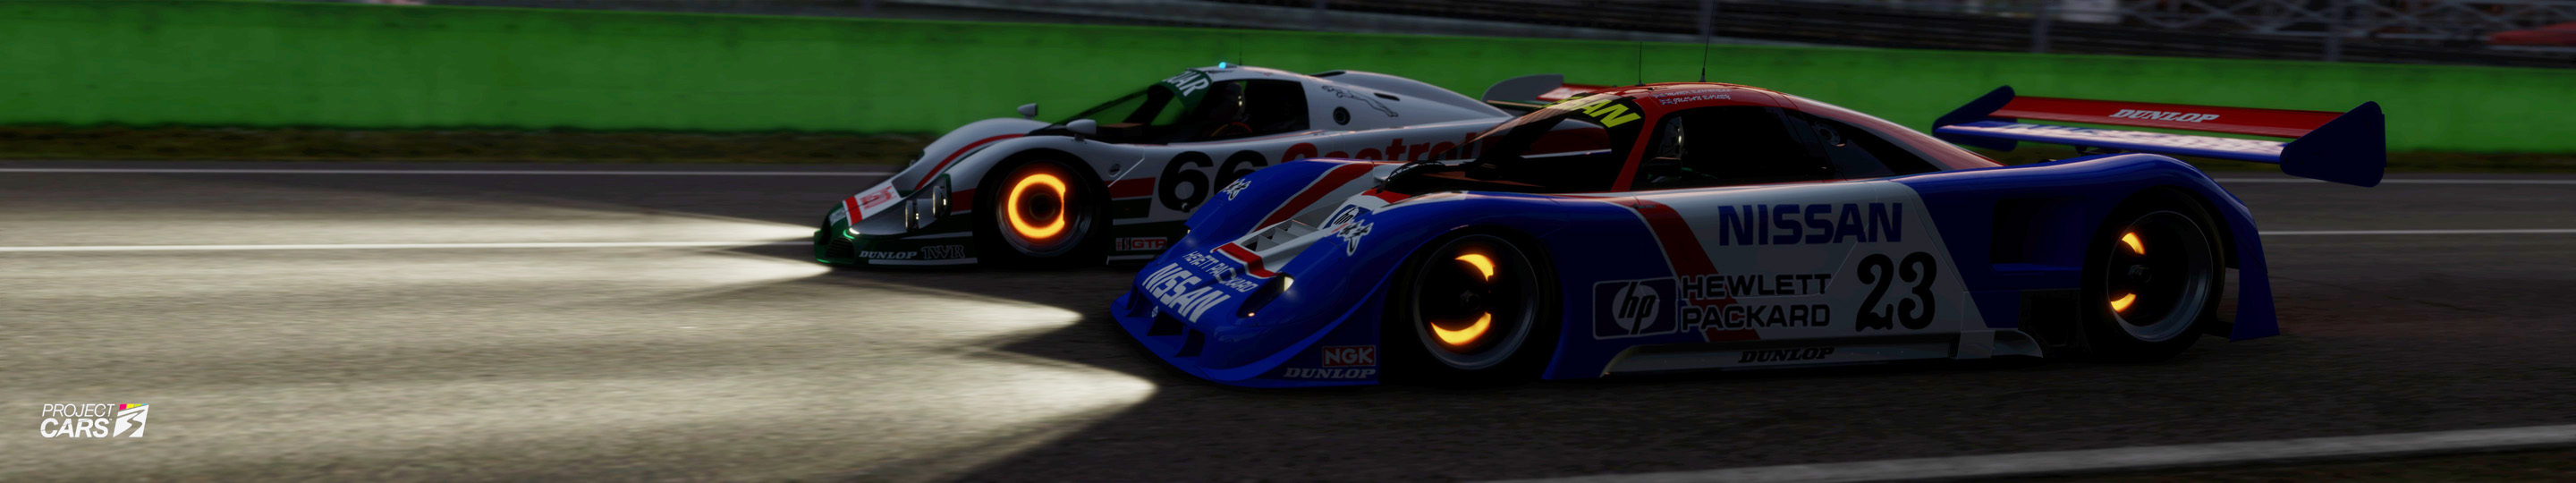 3 PROJECT CARS GROUP C at MONZA copy.jpg